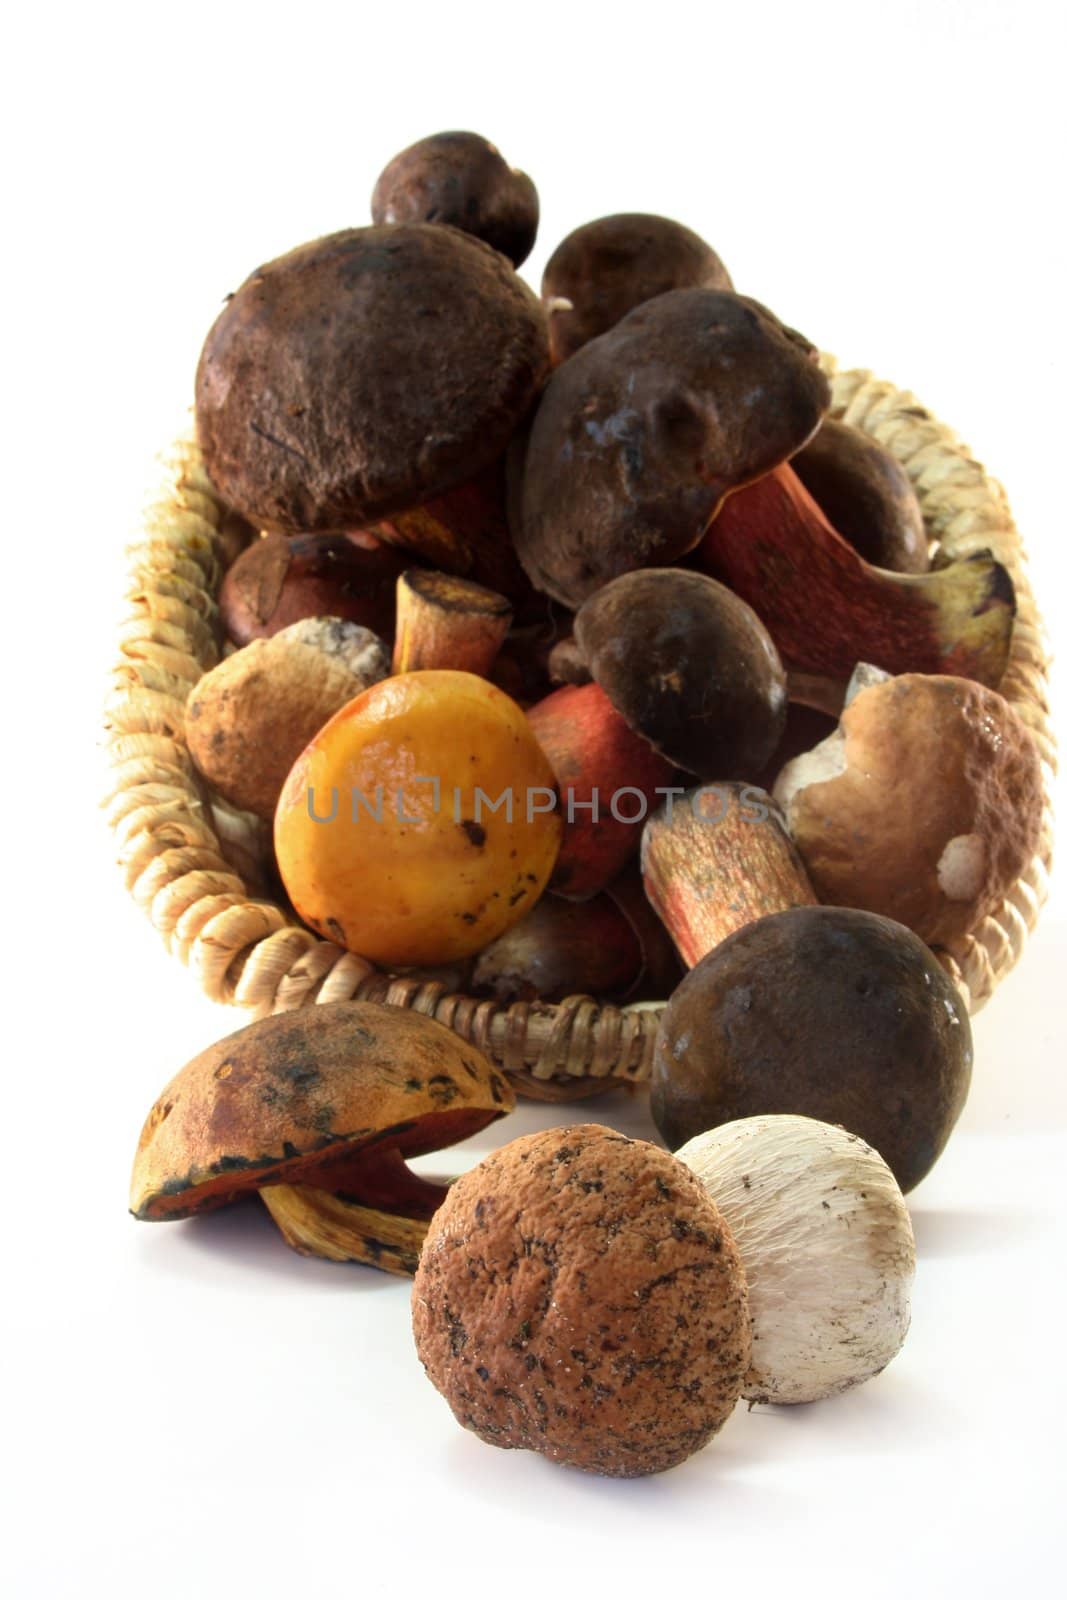 various wild mushrooms on a white background